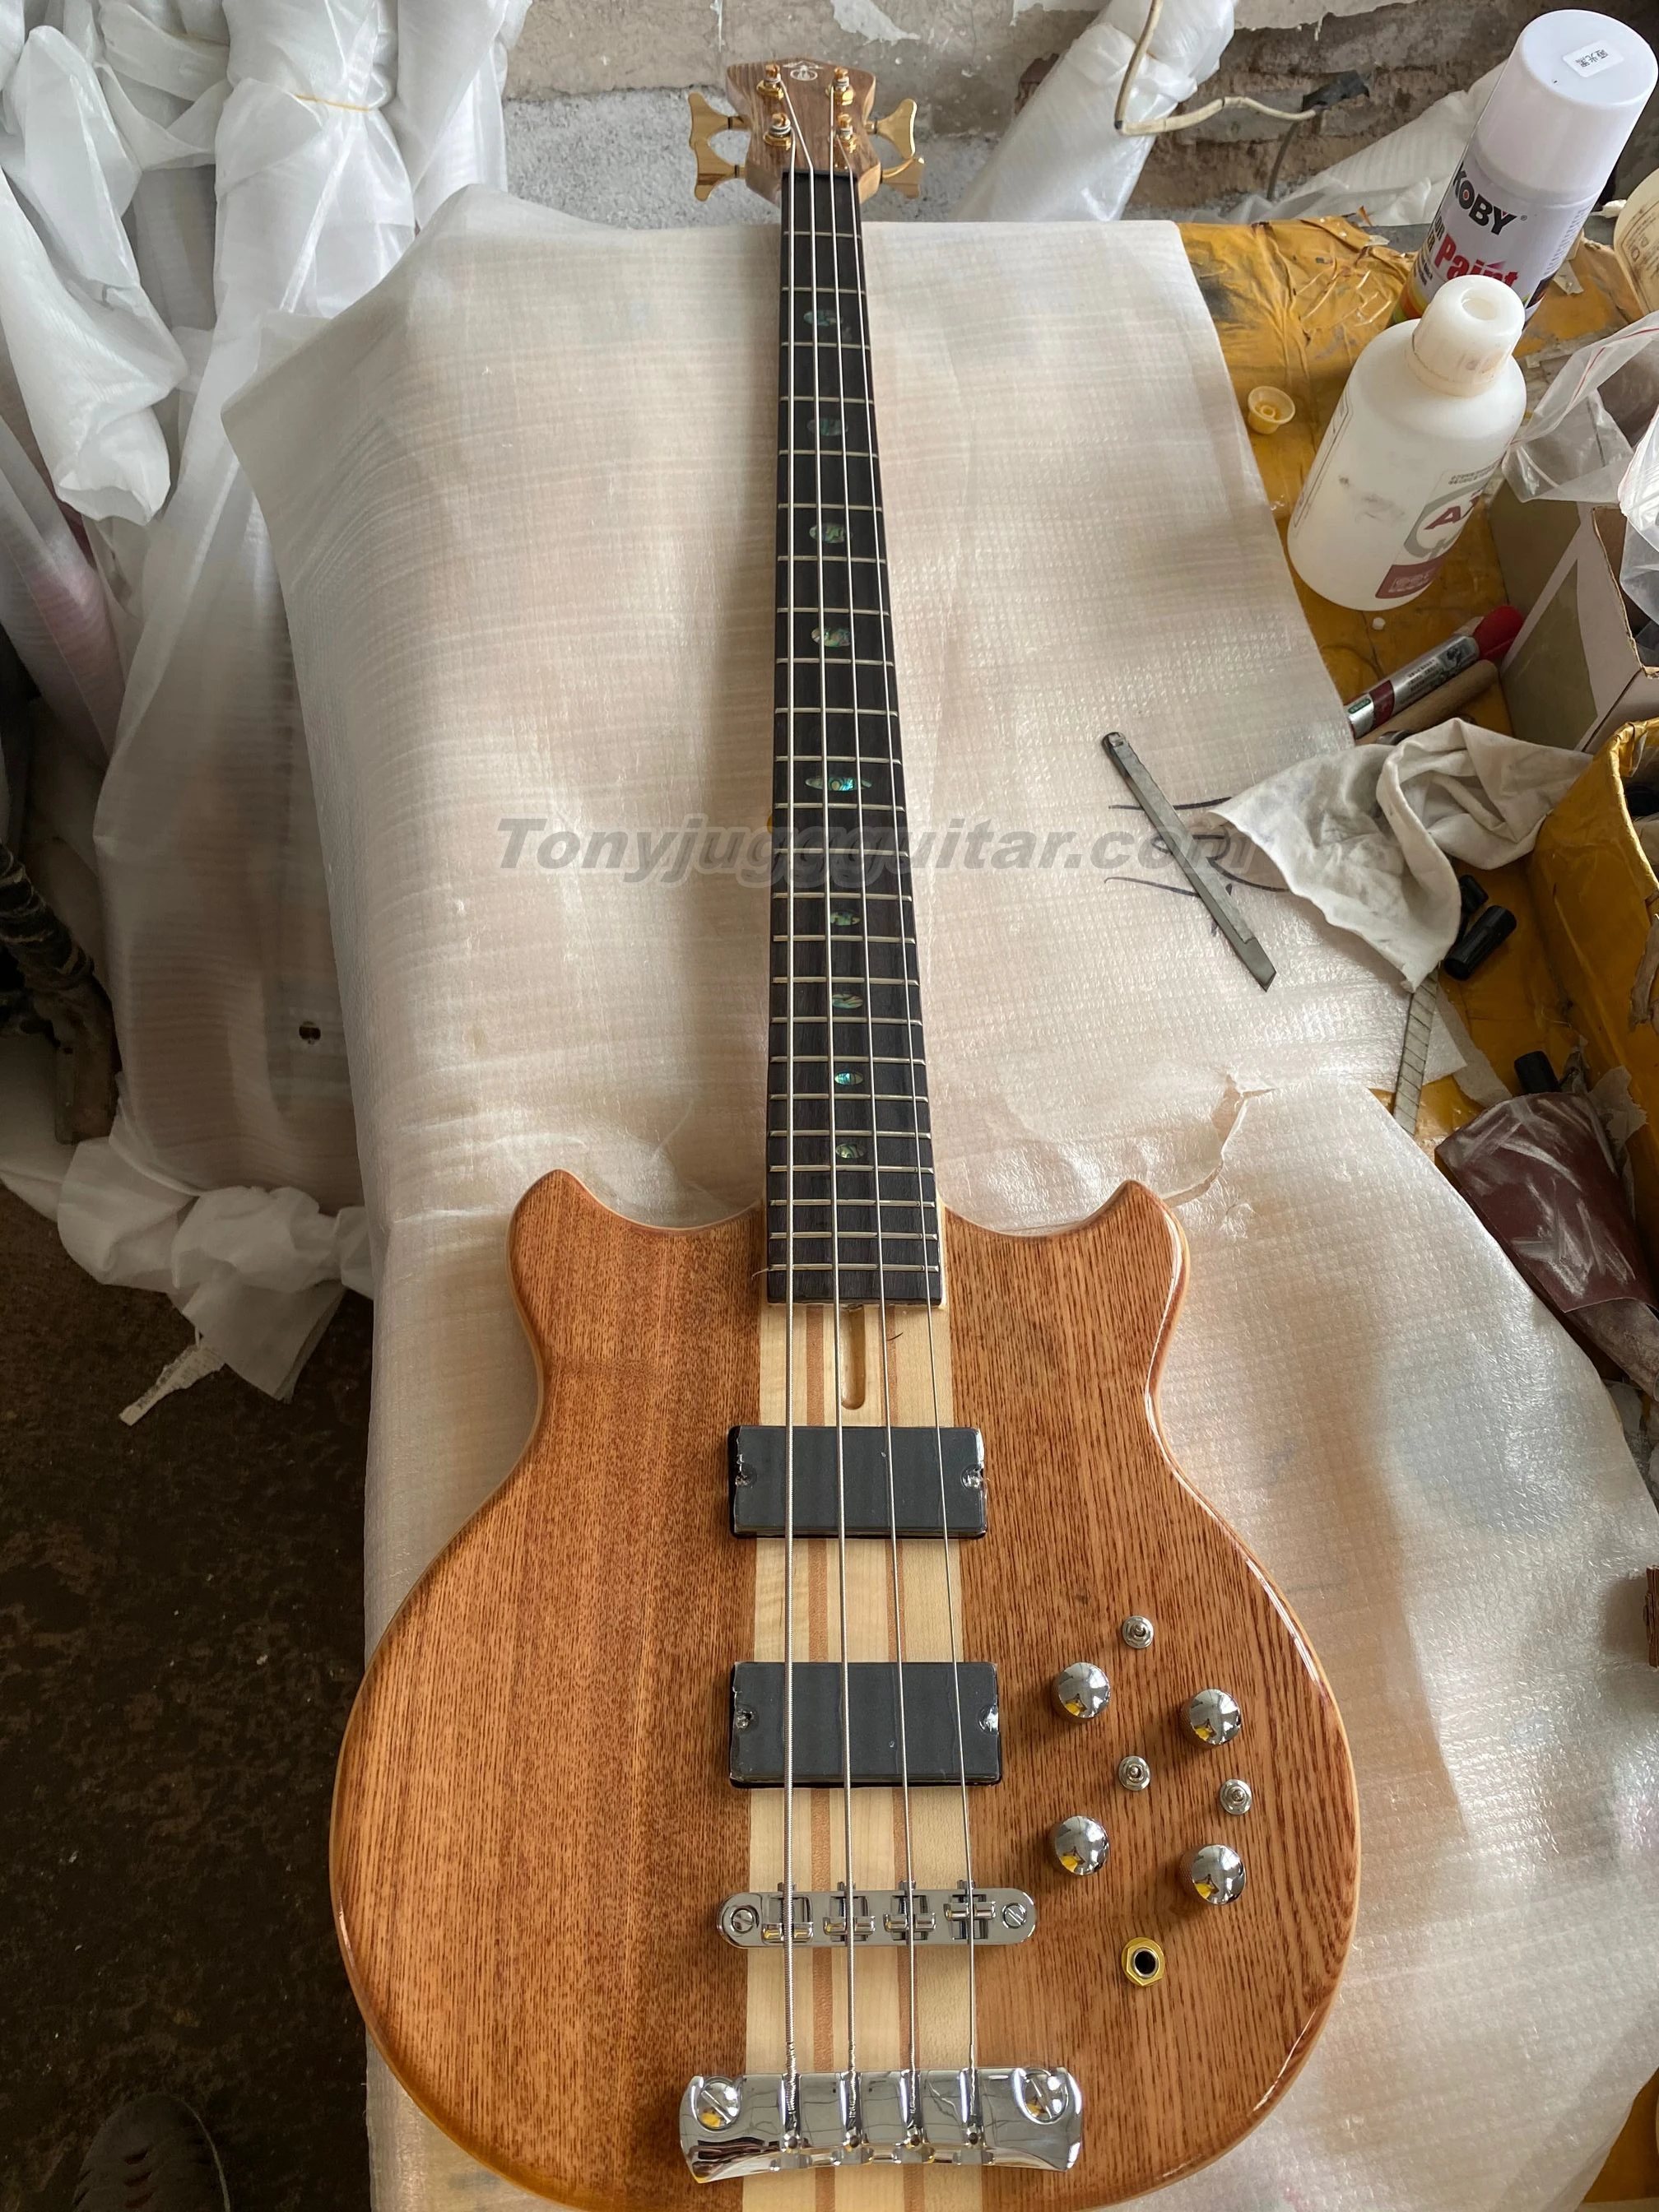 

Custom Alembic Stanley Clake Brown Ash 4 Strings Electric Bass Guitar Neck Through Body,5 pliesNeck,Gold Hardware, Abalone Inlay